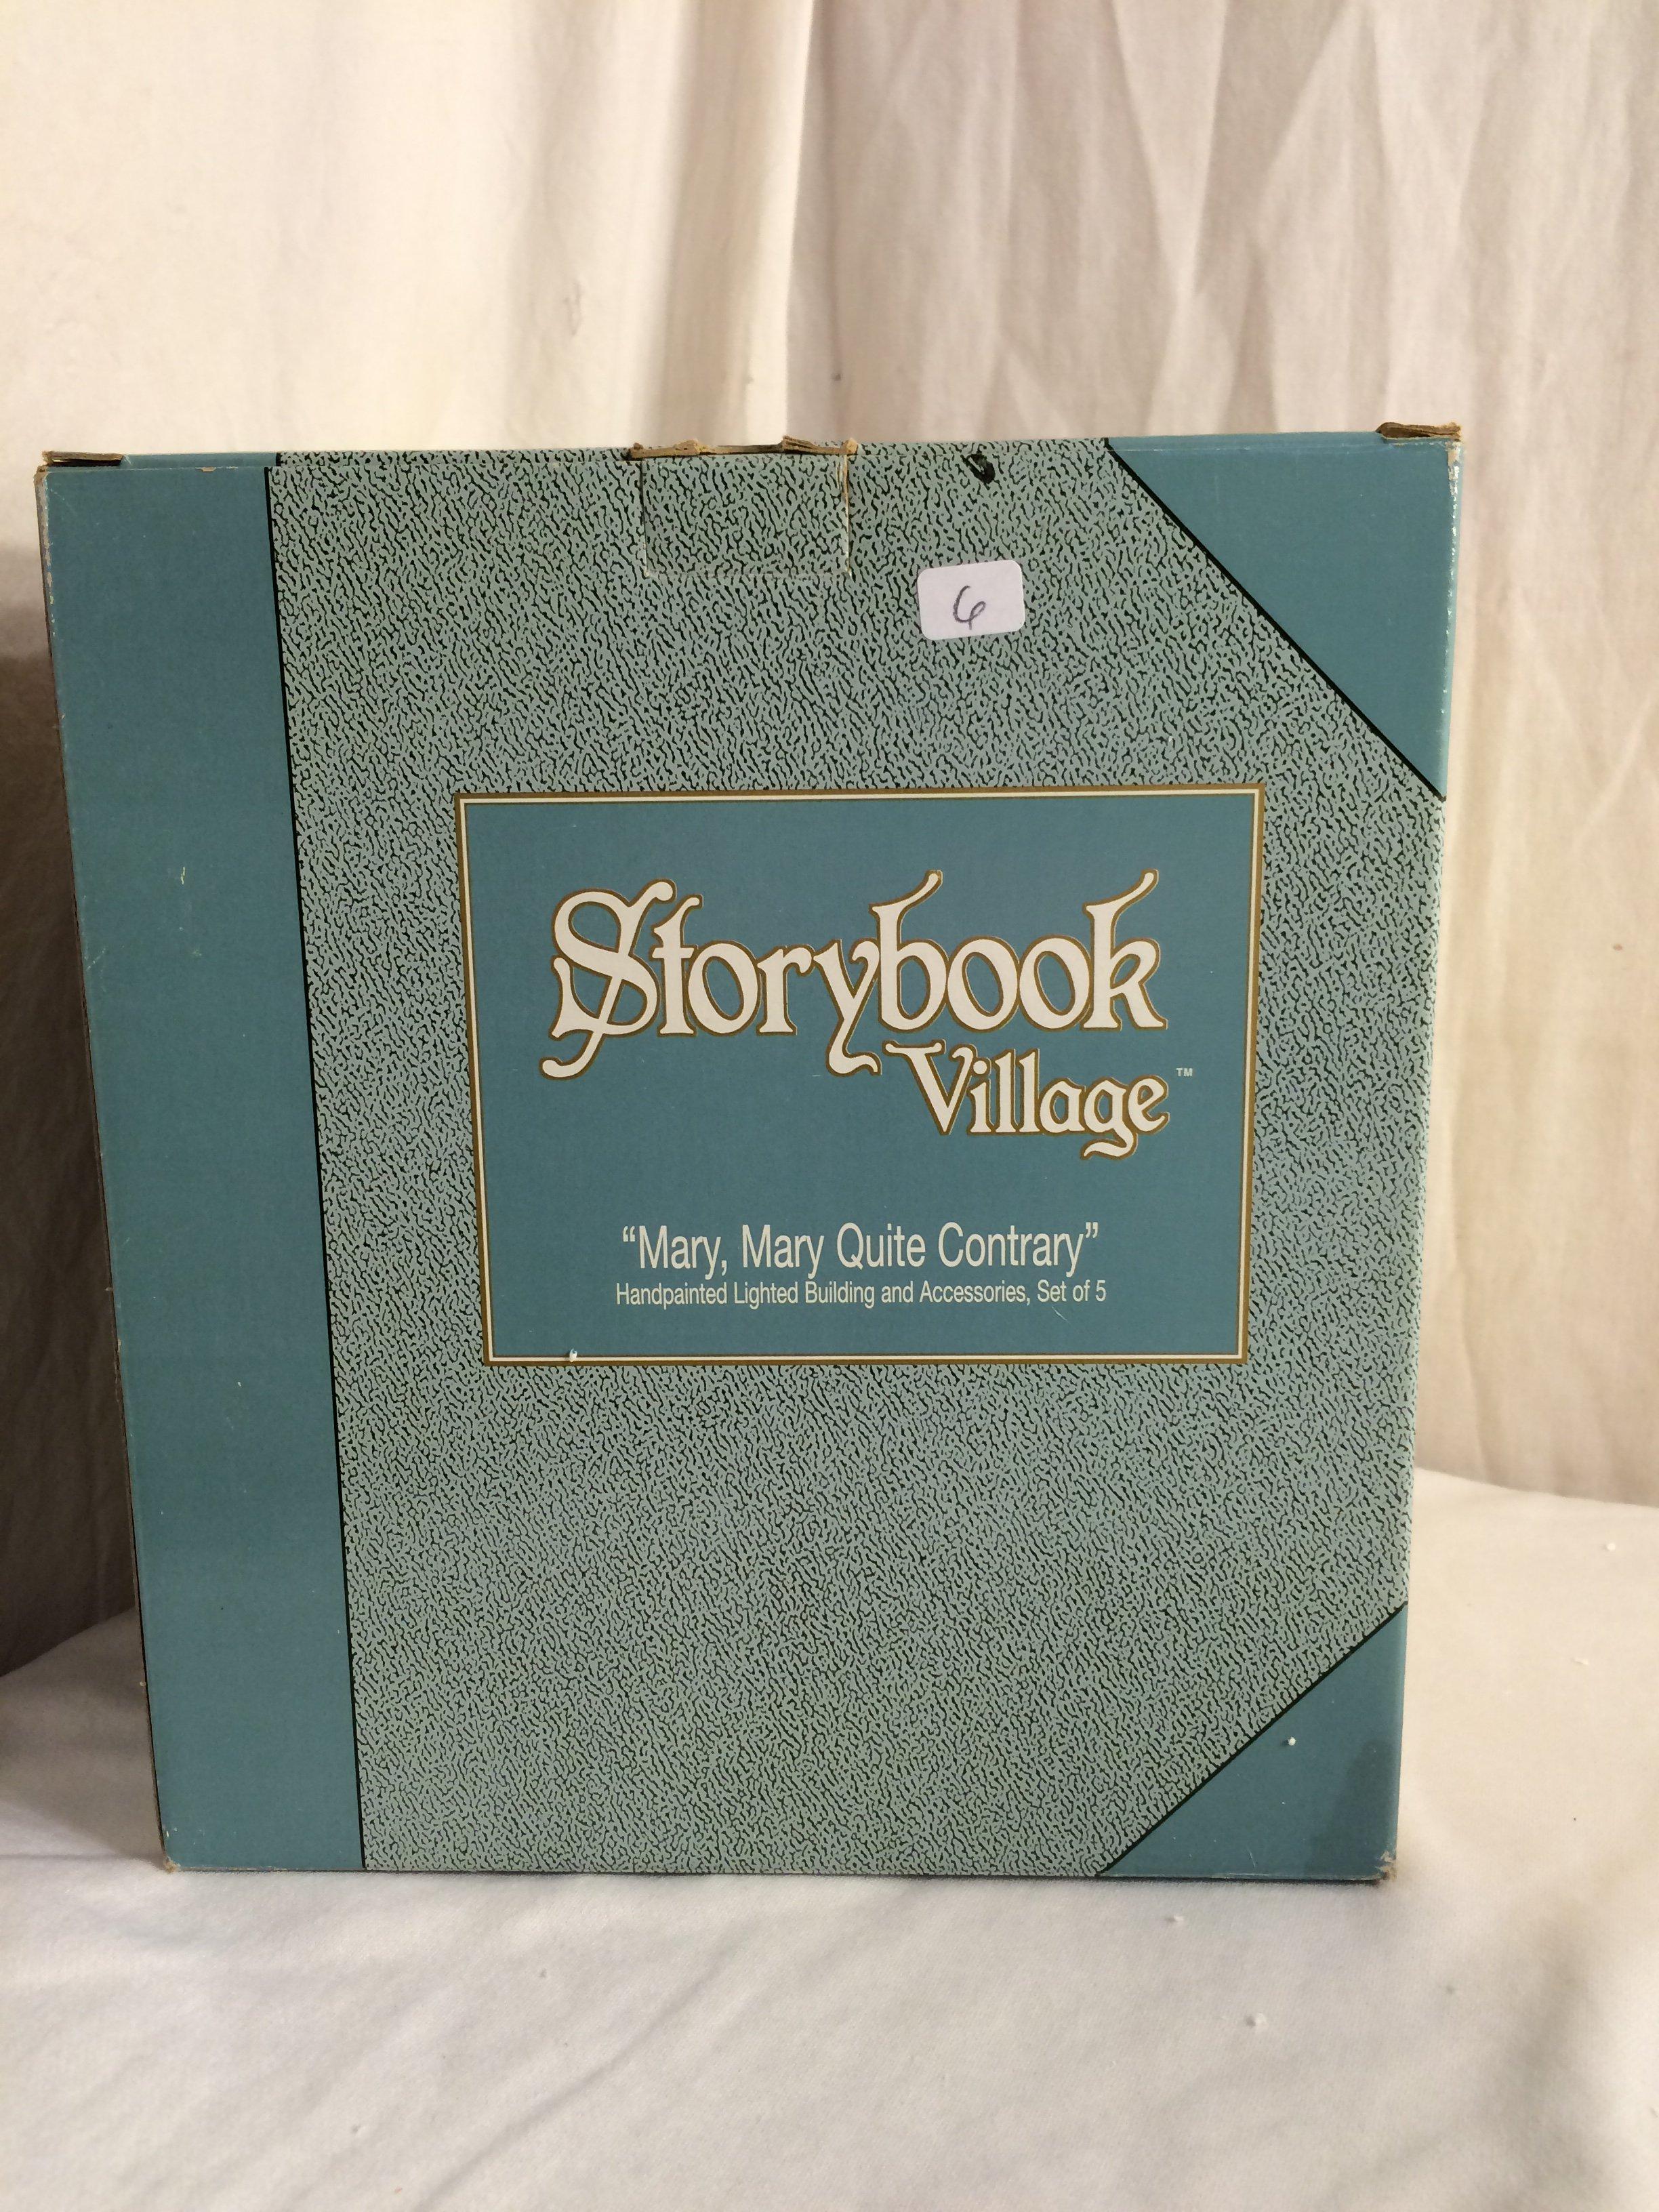 Collector Storybook Village Fairy Tales "Mary, Mary Quite Contrary" handpainted Lighted Building Set